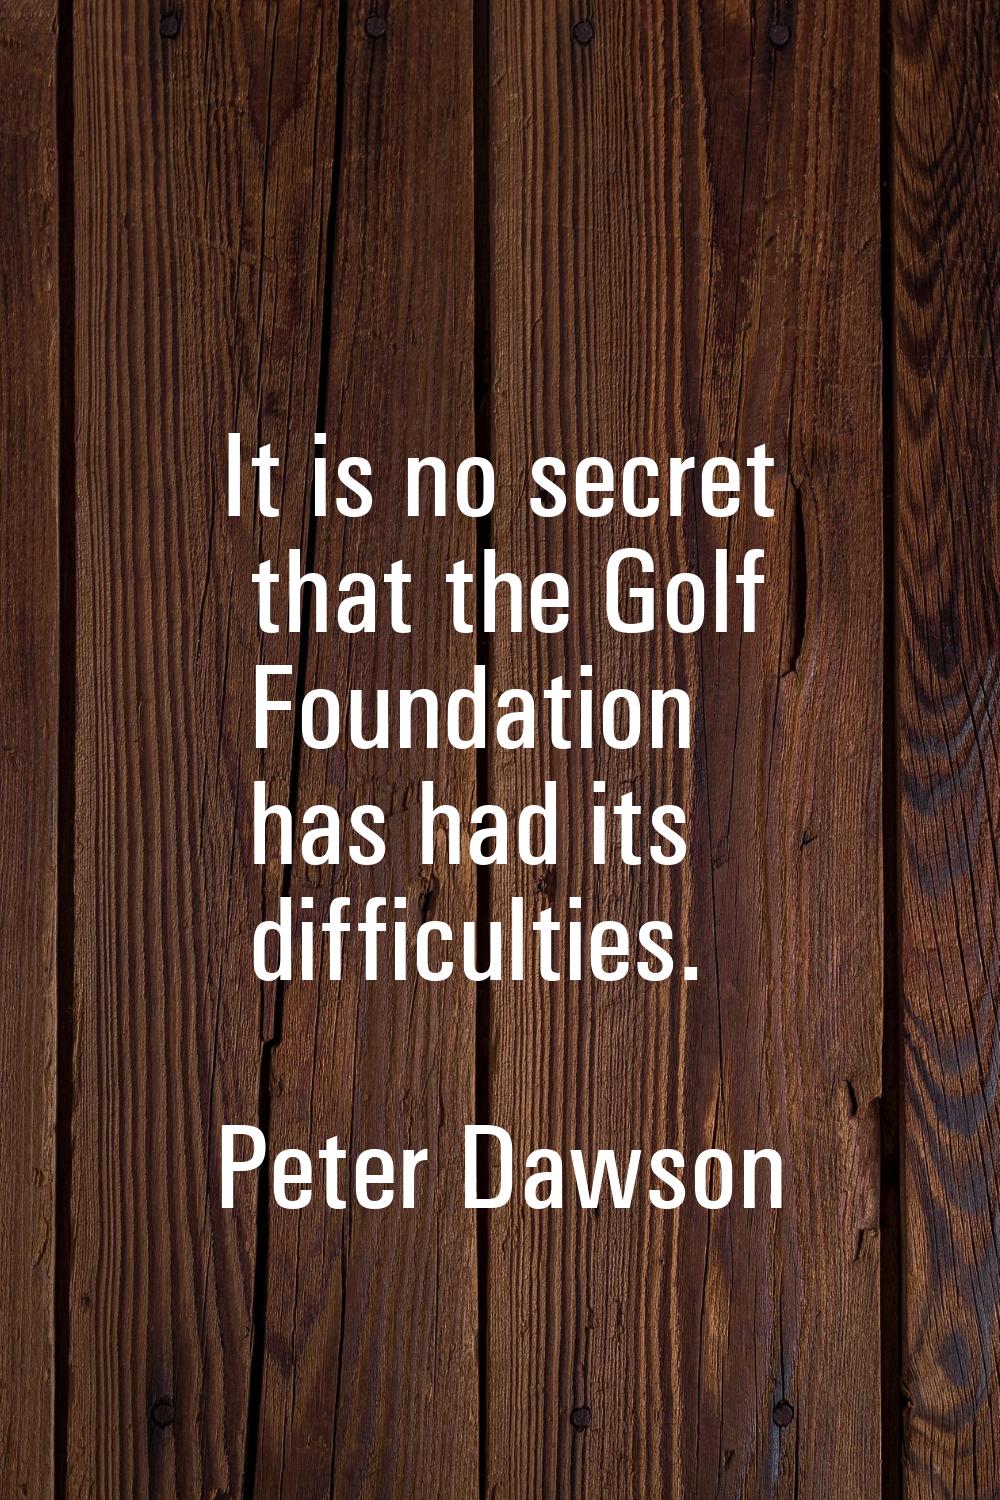 It is no secret that the Golf Foundation has had its difficulties.